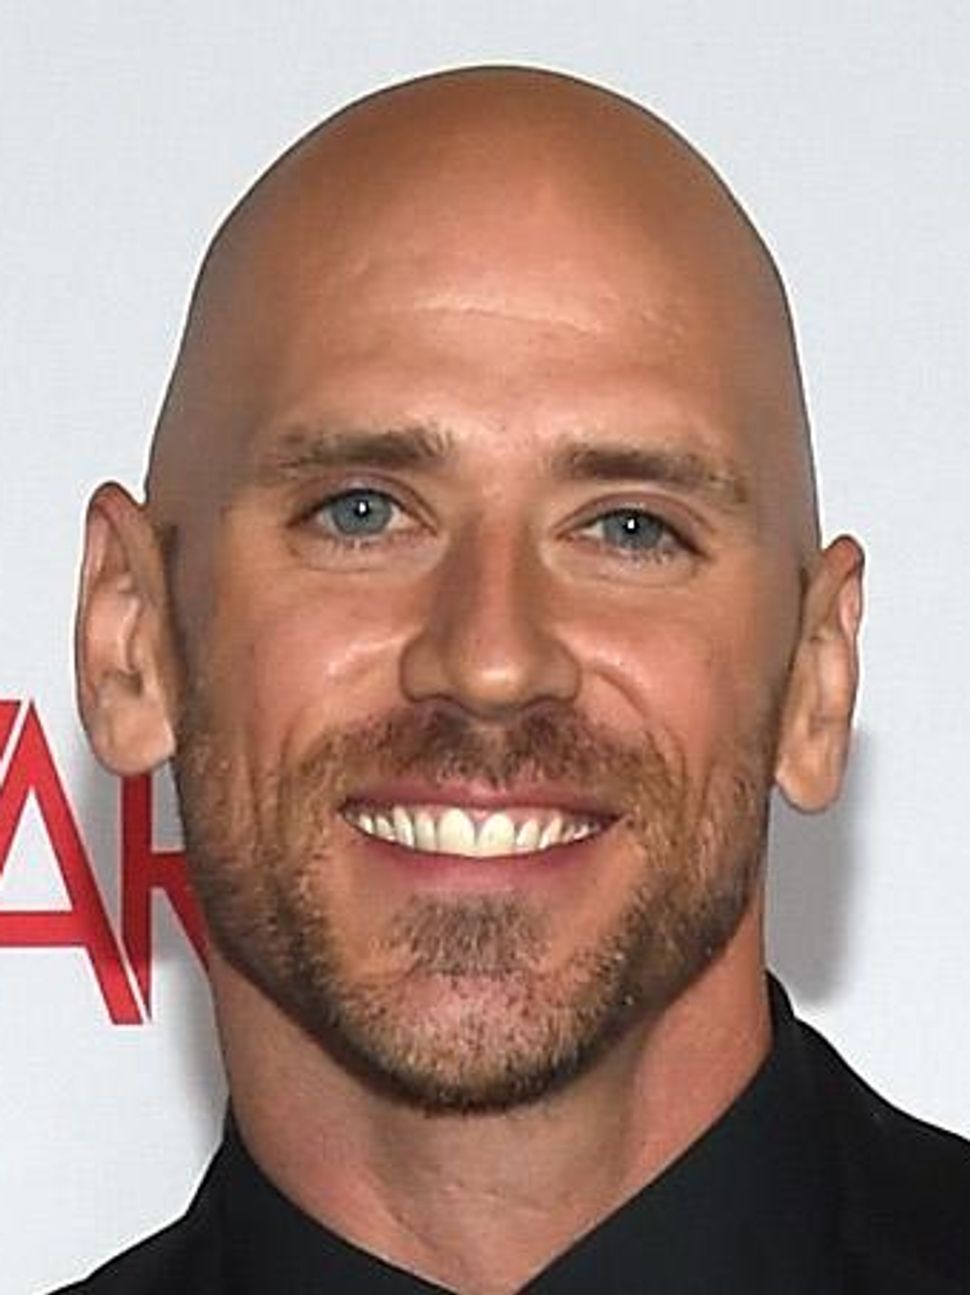 Bald Male Porn Stars - Porn star Johnny Sins reveals what men are doing wrong in the bedroom |  indy100